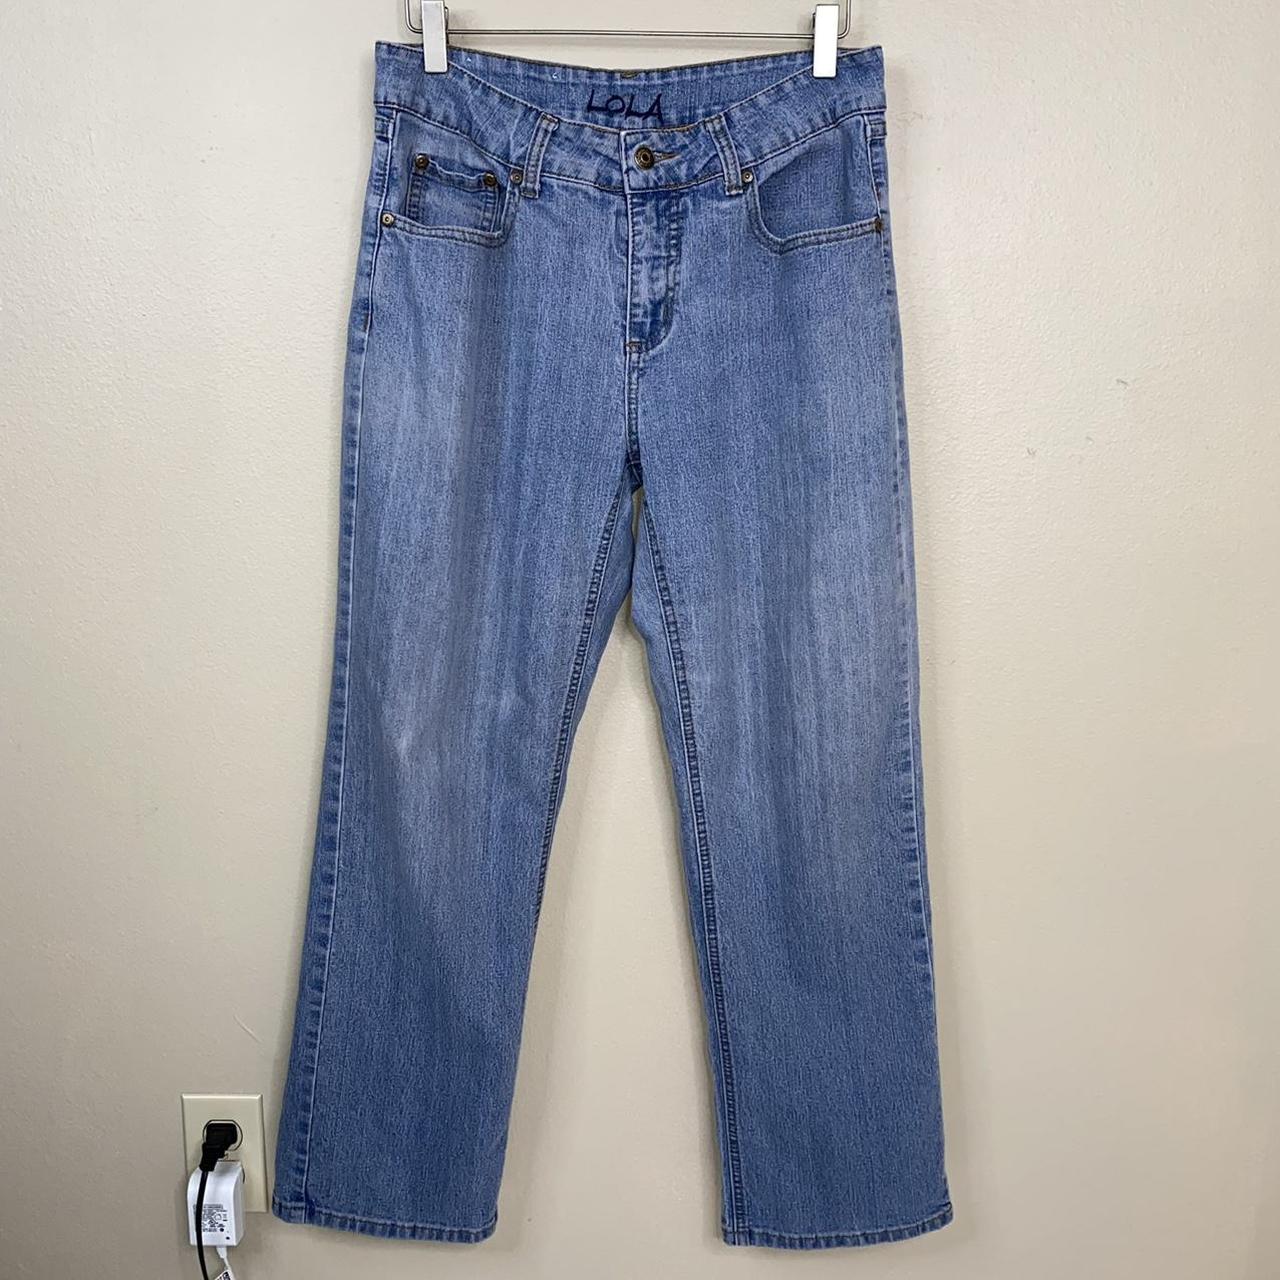 Product Image 3 - Southern Expression LOLA mom jeans
Size